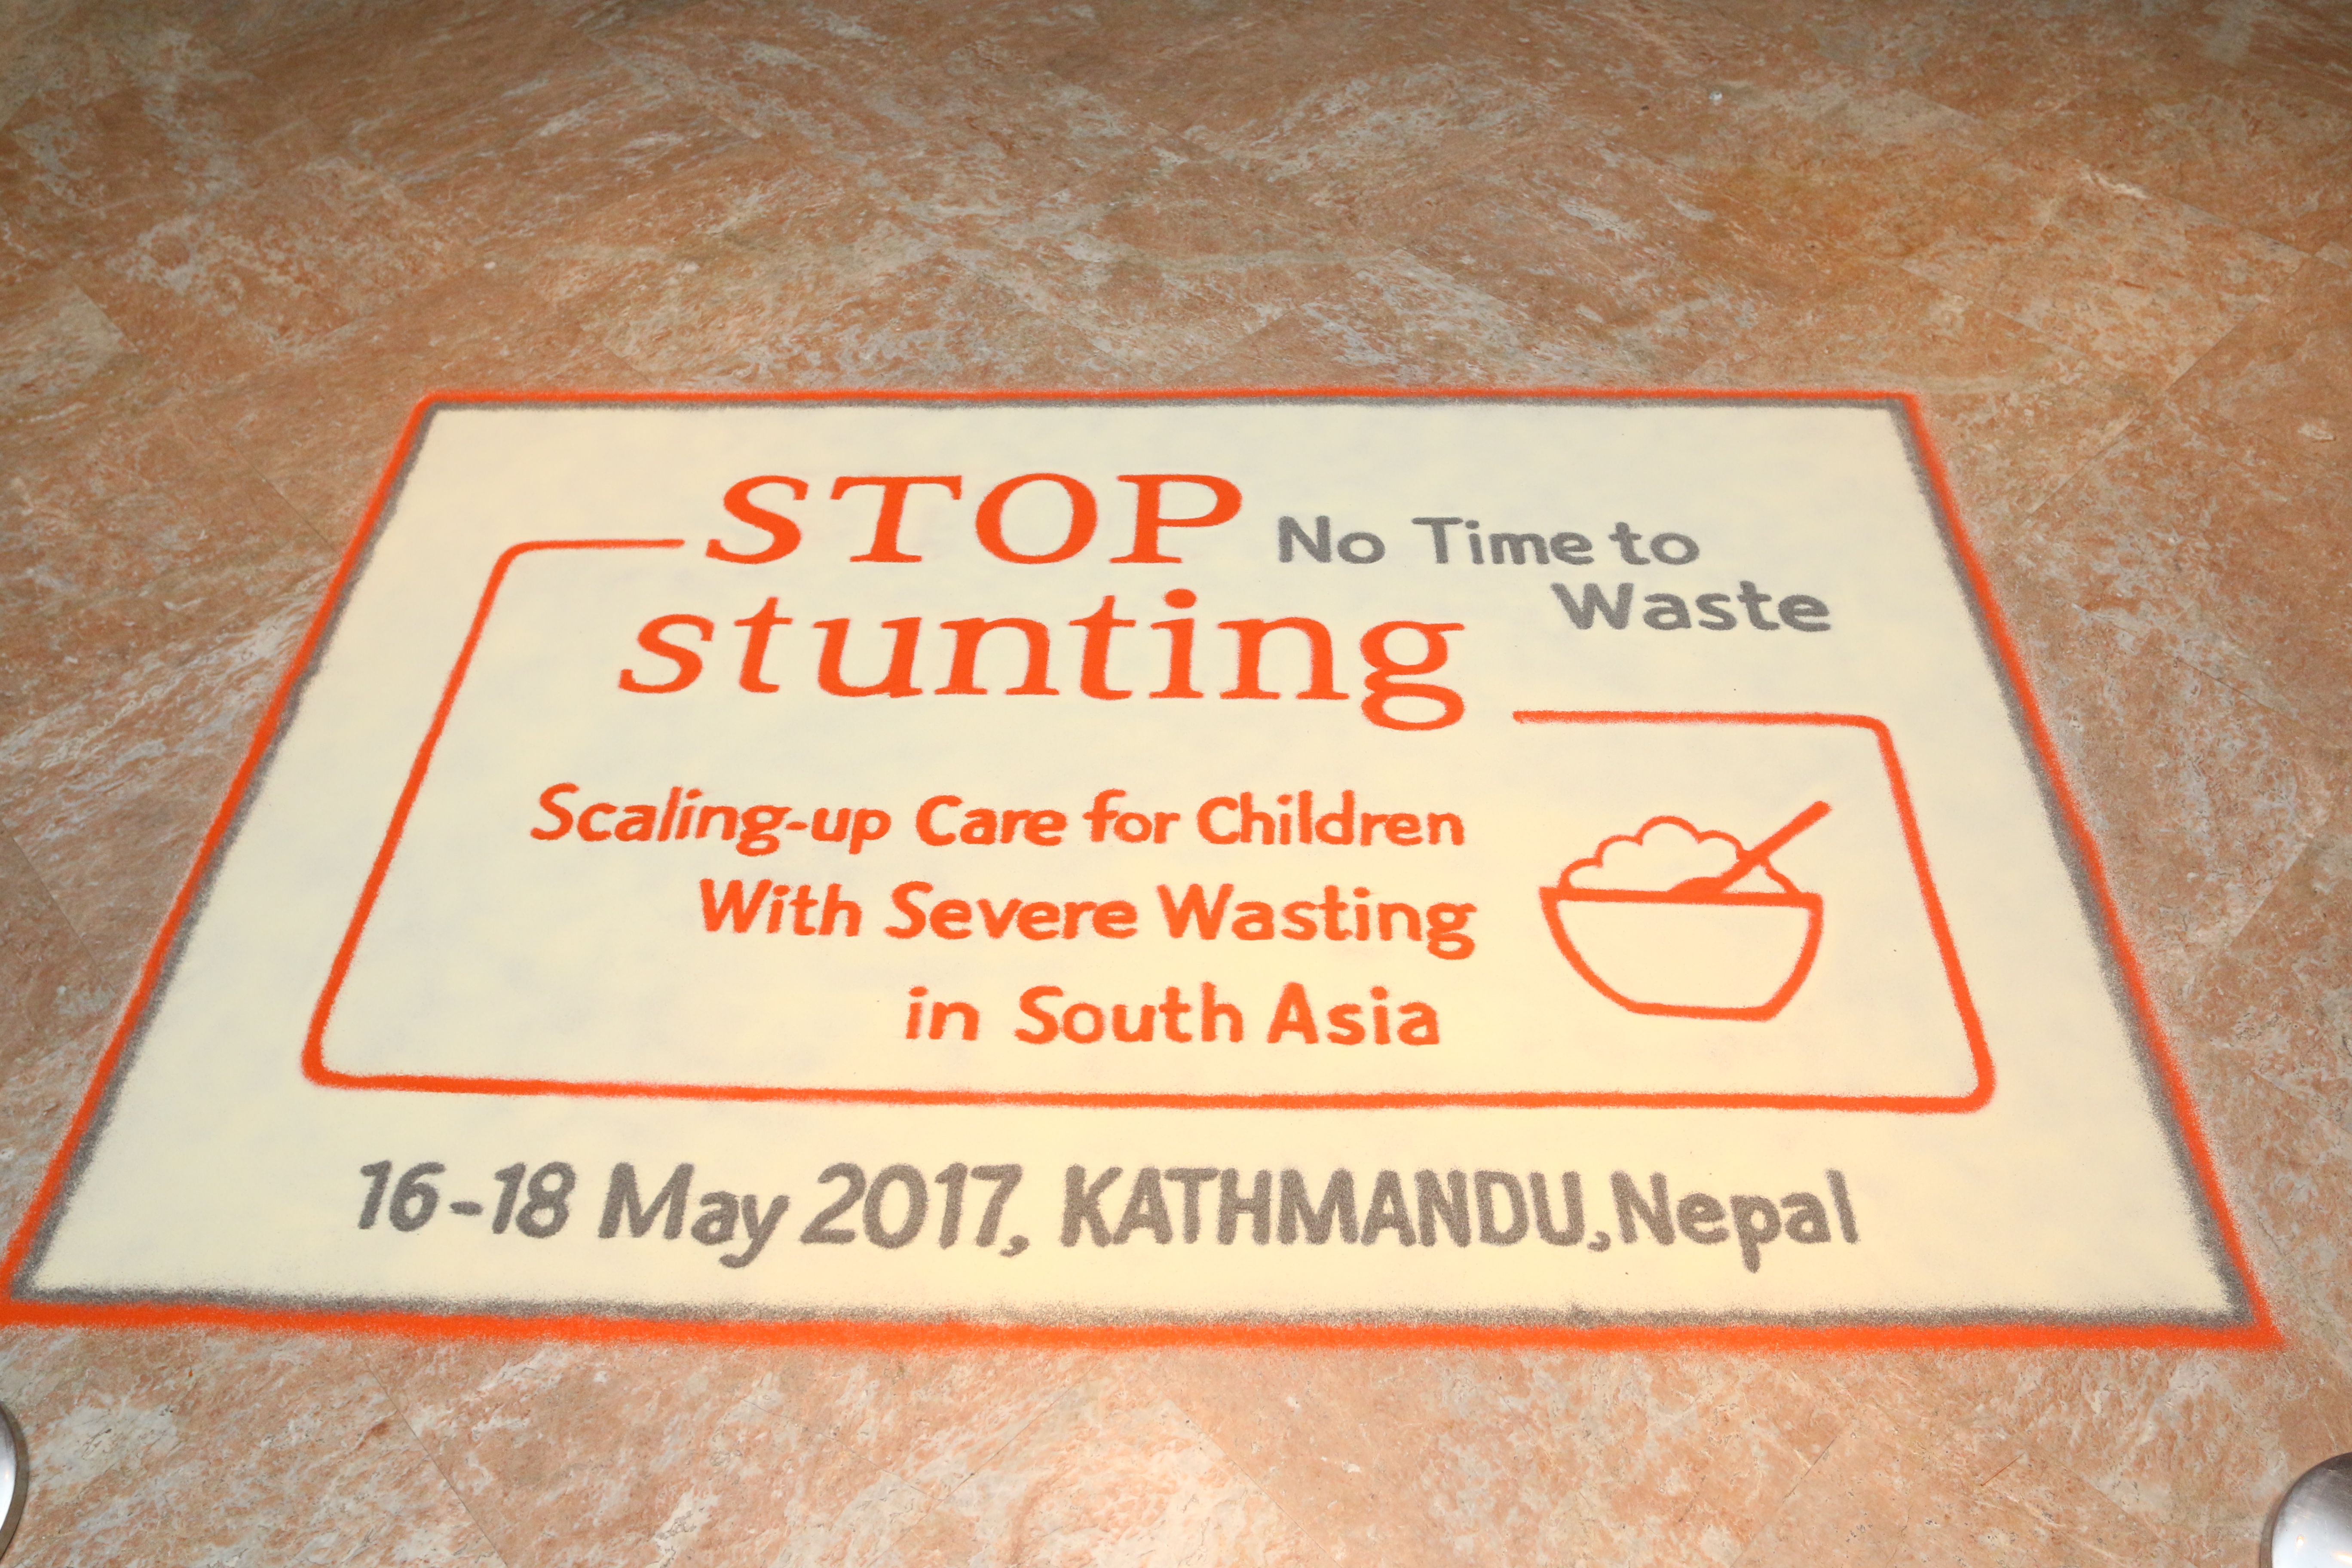 Image shows poster from conference that reads "STOP stuning. No time to waste." 16-18 May 2017.